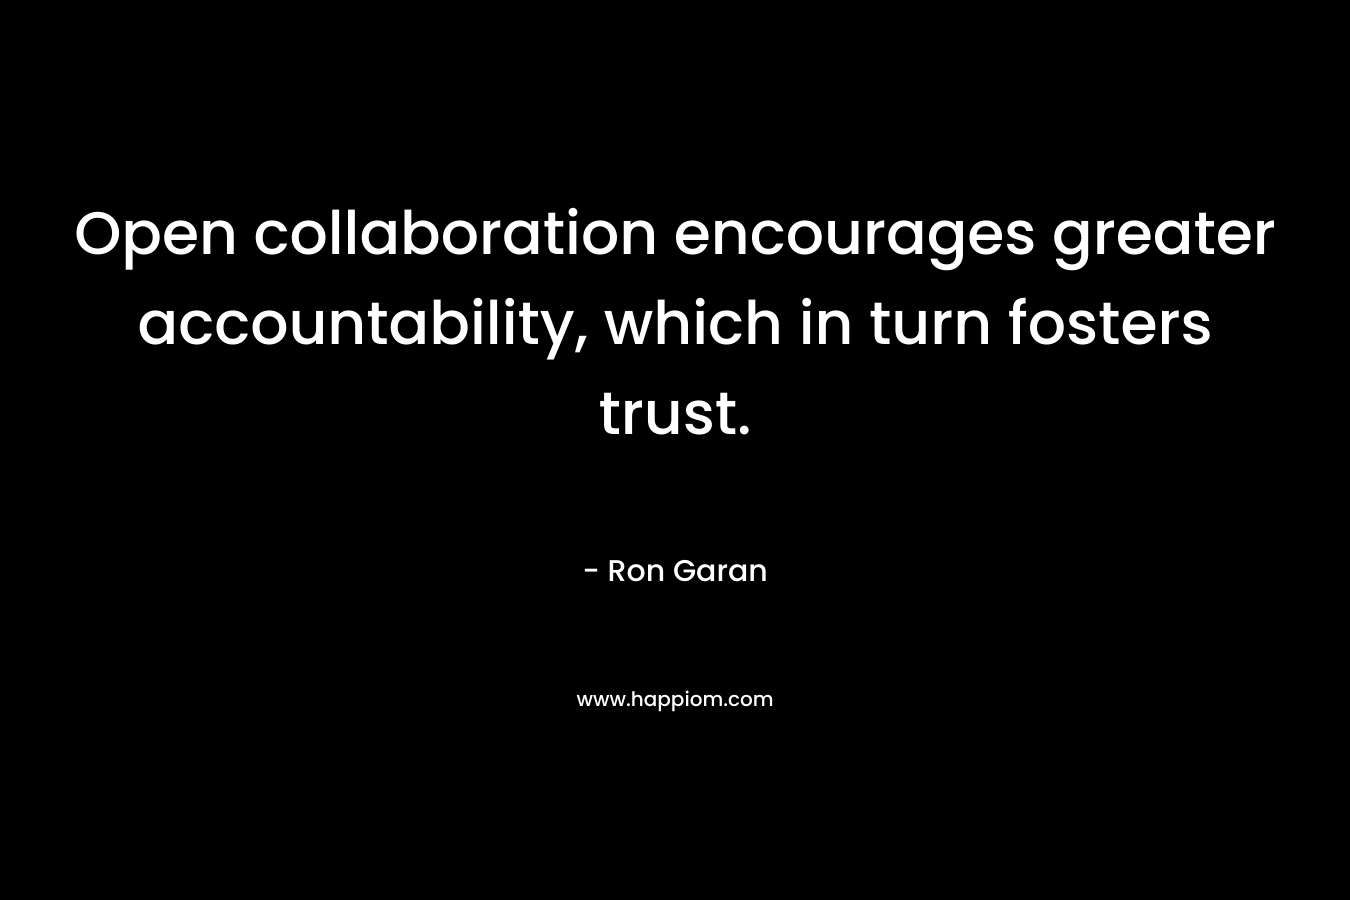 Open collaboration encourages greater accountability, which in turn fosters trust.